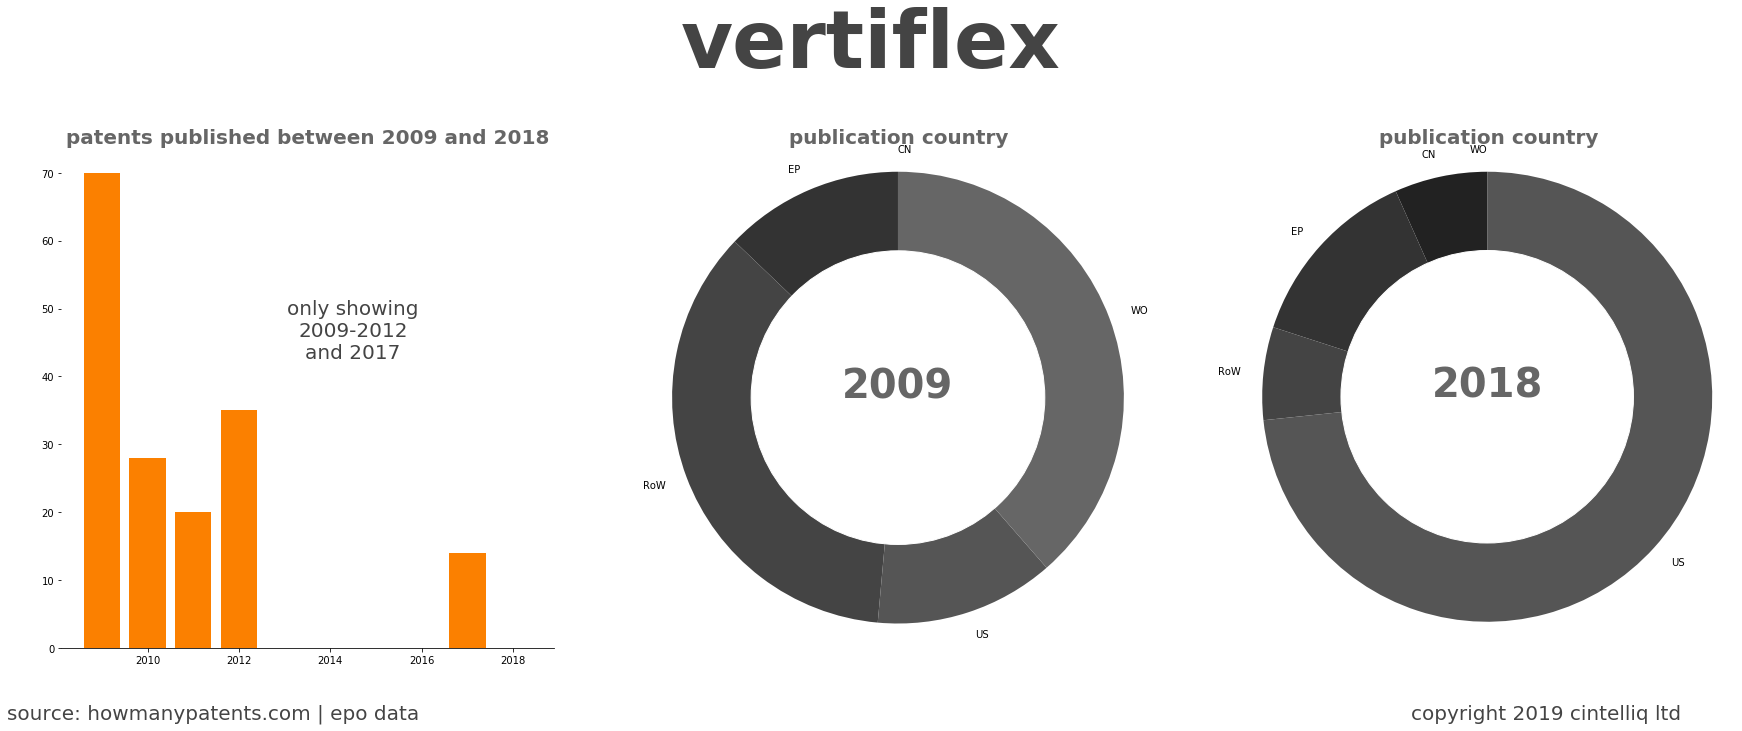 summary of patents for Vertiflex